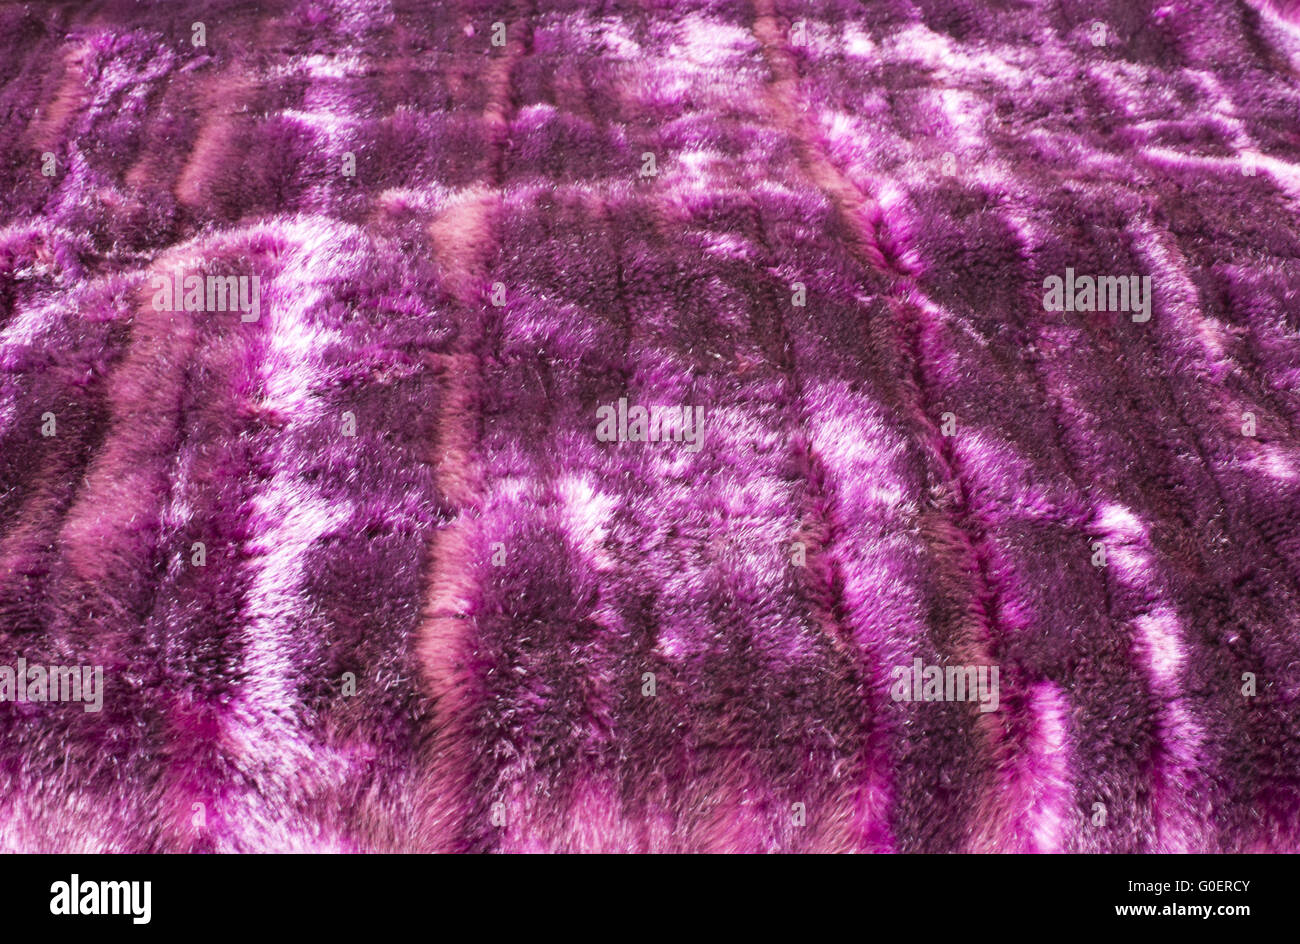 Red fur blanket as background Stock Photo